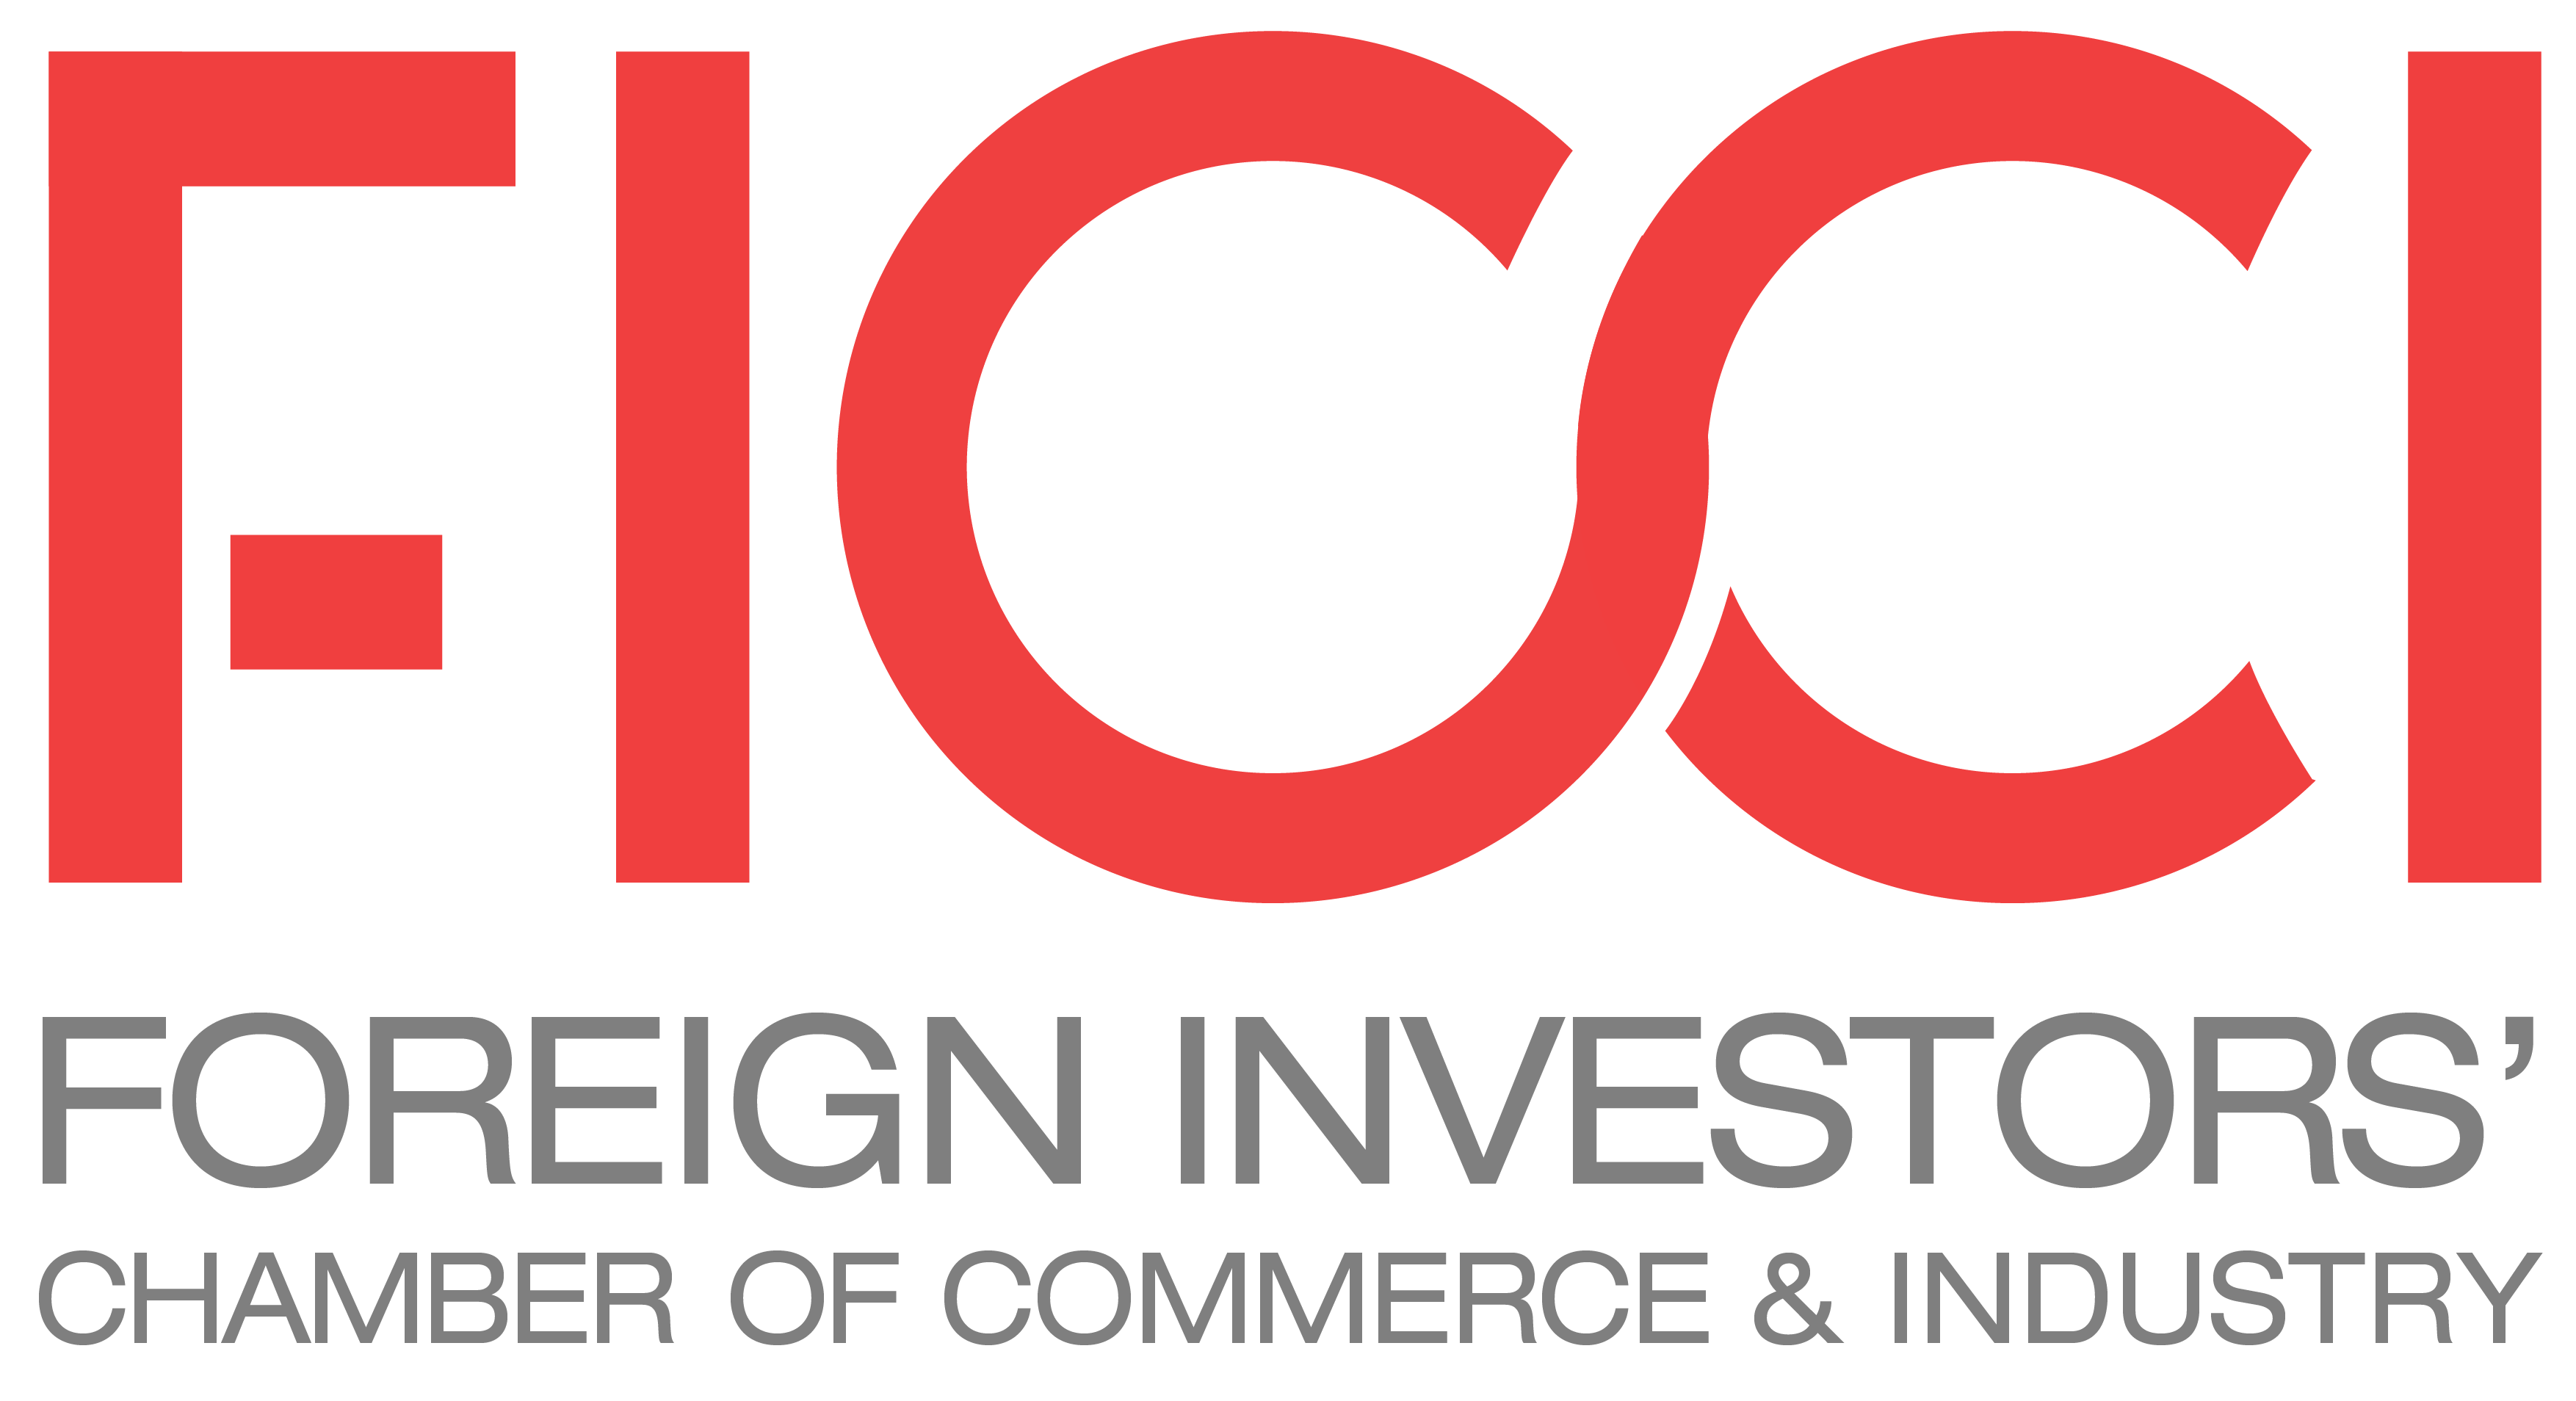 Foreign Investors Chamber of Commerce & Industry - Bangladesh